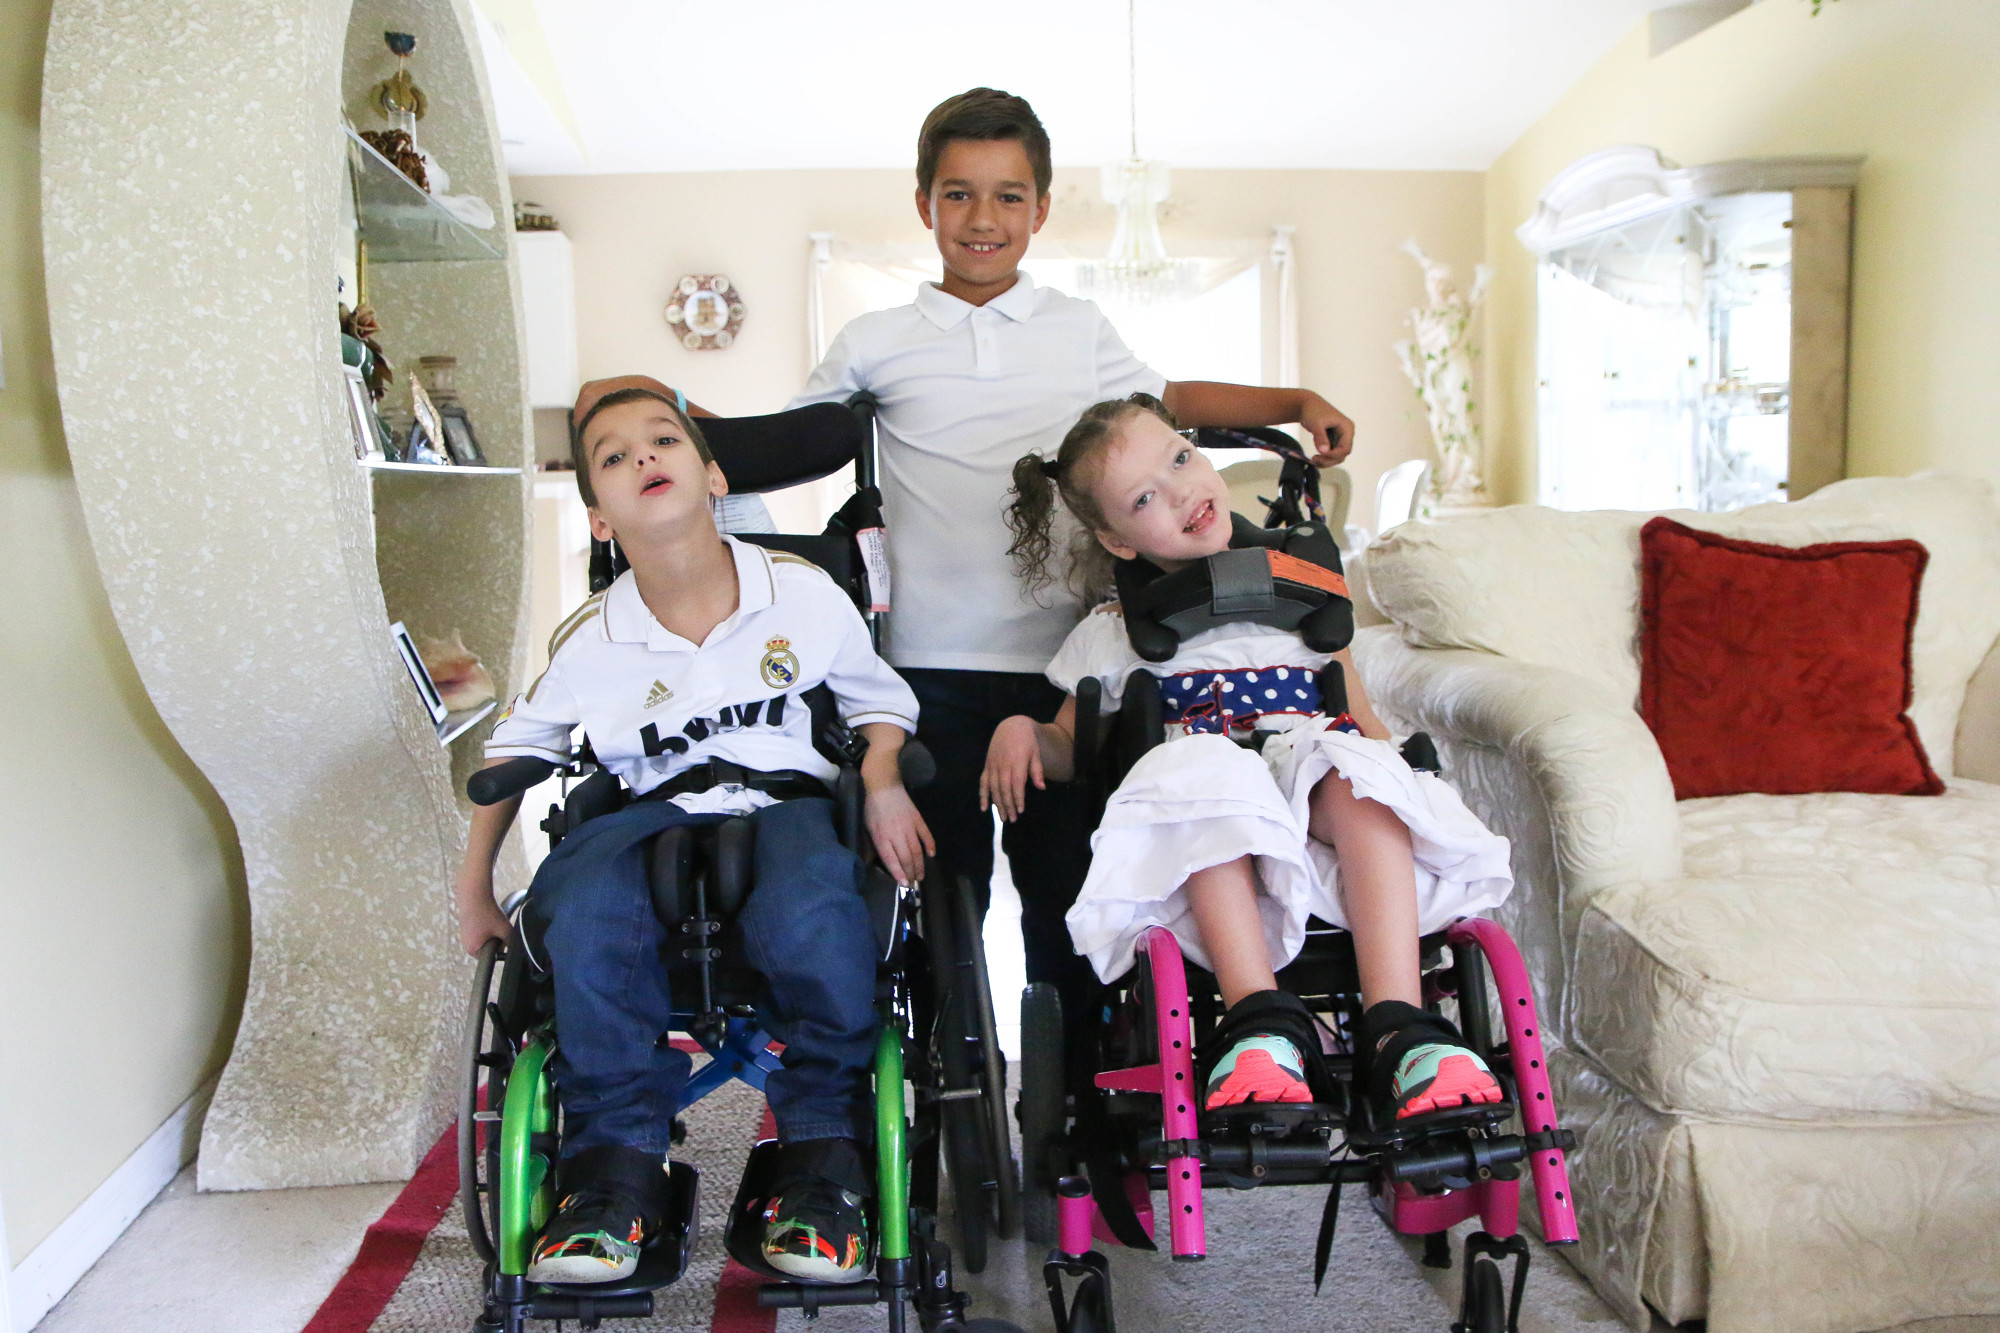 Landon Grover, 11, stands behind his brother Brayden, 10, and his sister Alaina, 7. Photo by Paige Wilson